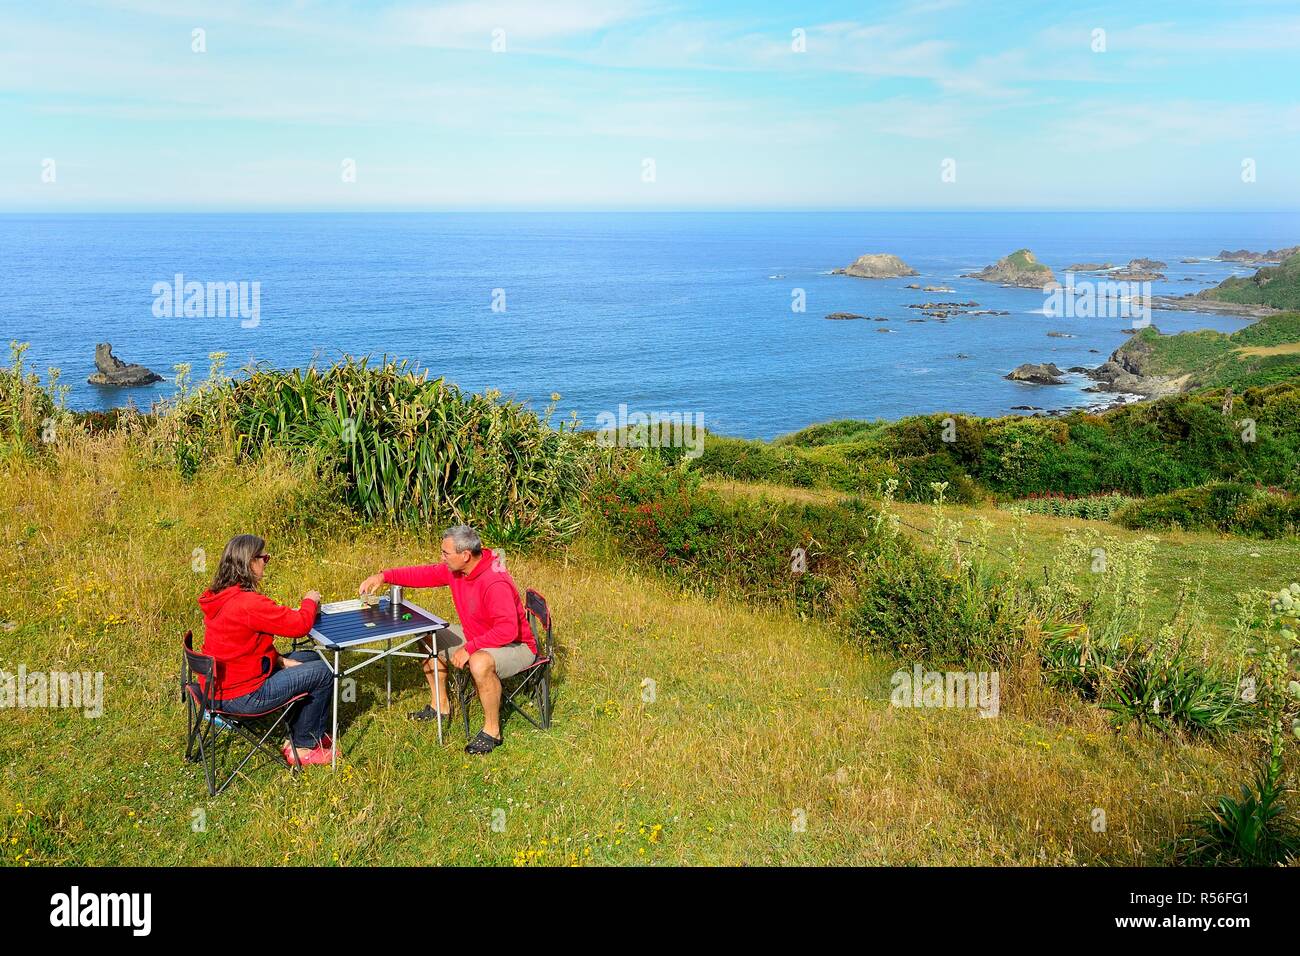 Couple plays board game on camping table, Pacific Coast, Pumillahue, Island Chiloé, Chile Stock Photo